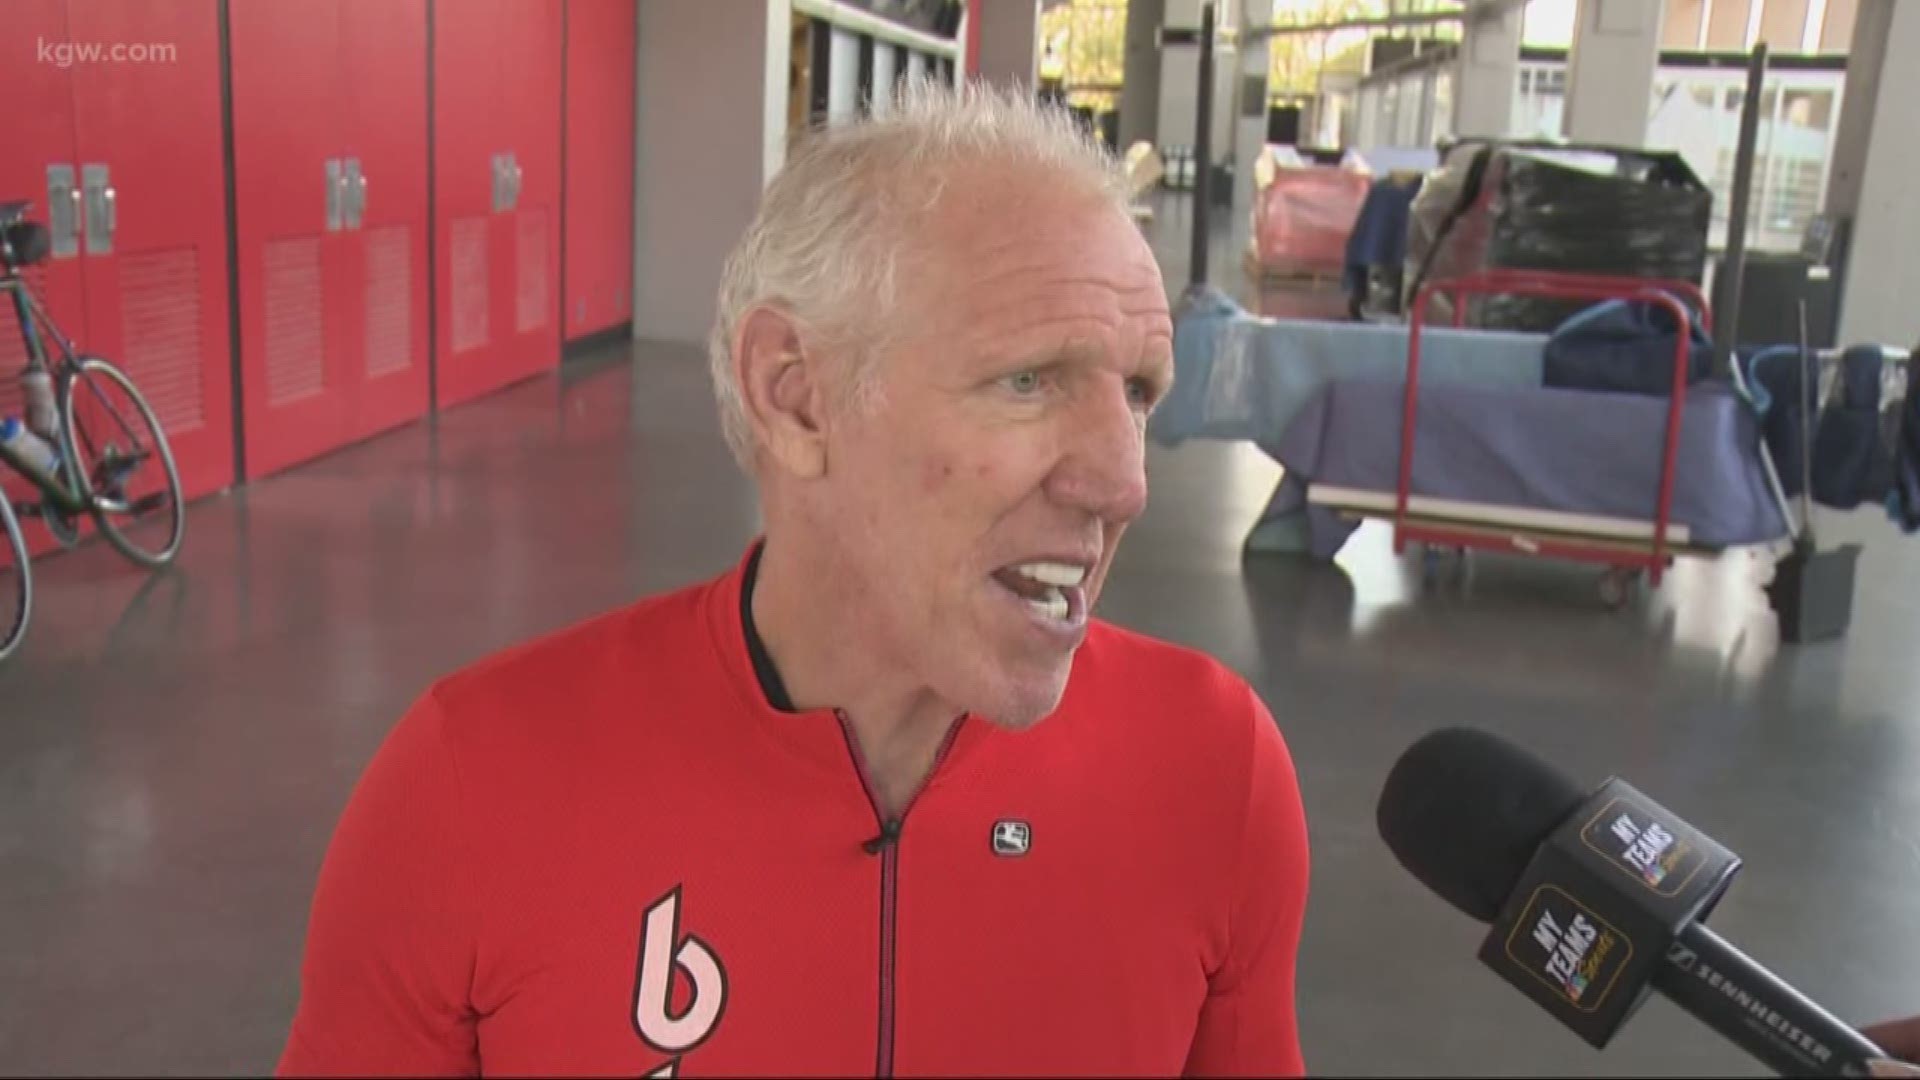 Portland basketball fans got to take a trip down memory lane with Blazers legend Bill Walton. They joined him on a bike ride through town to kick off the team’s 50th anniversary season.